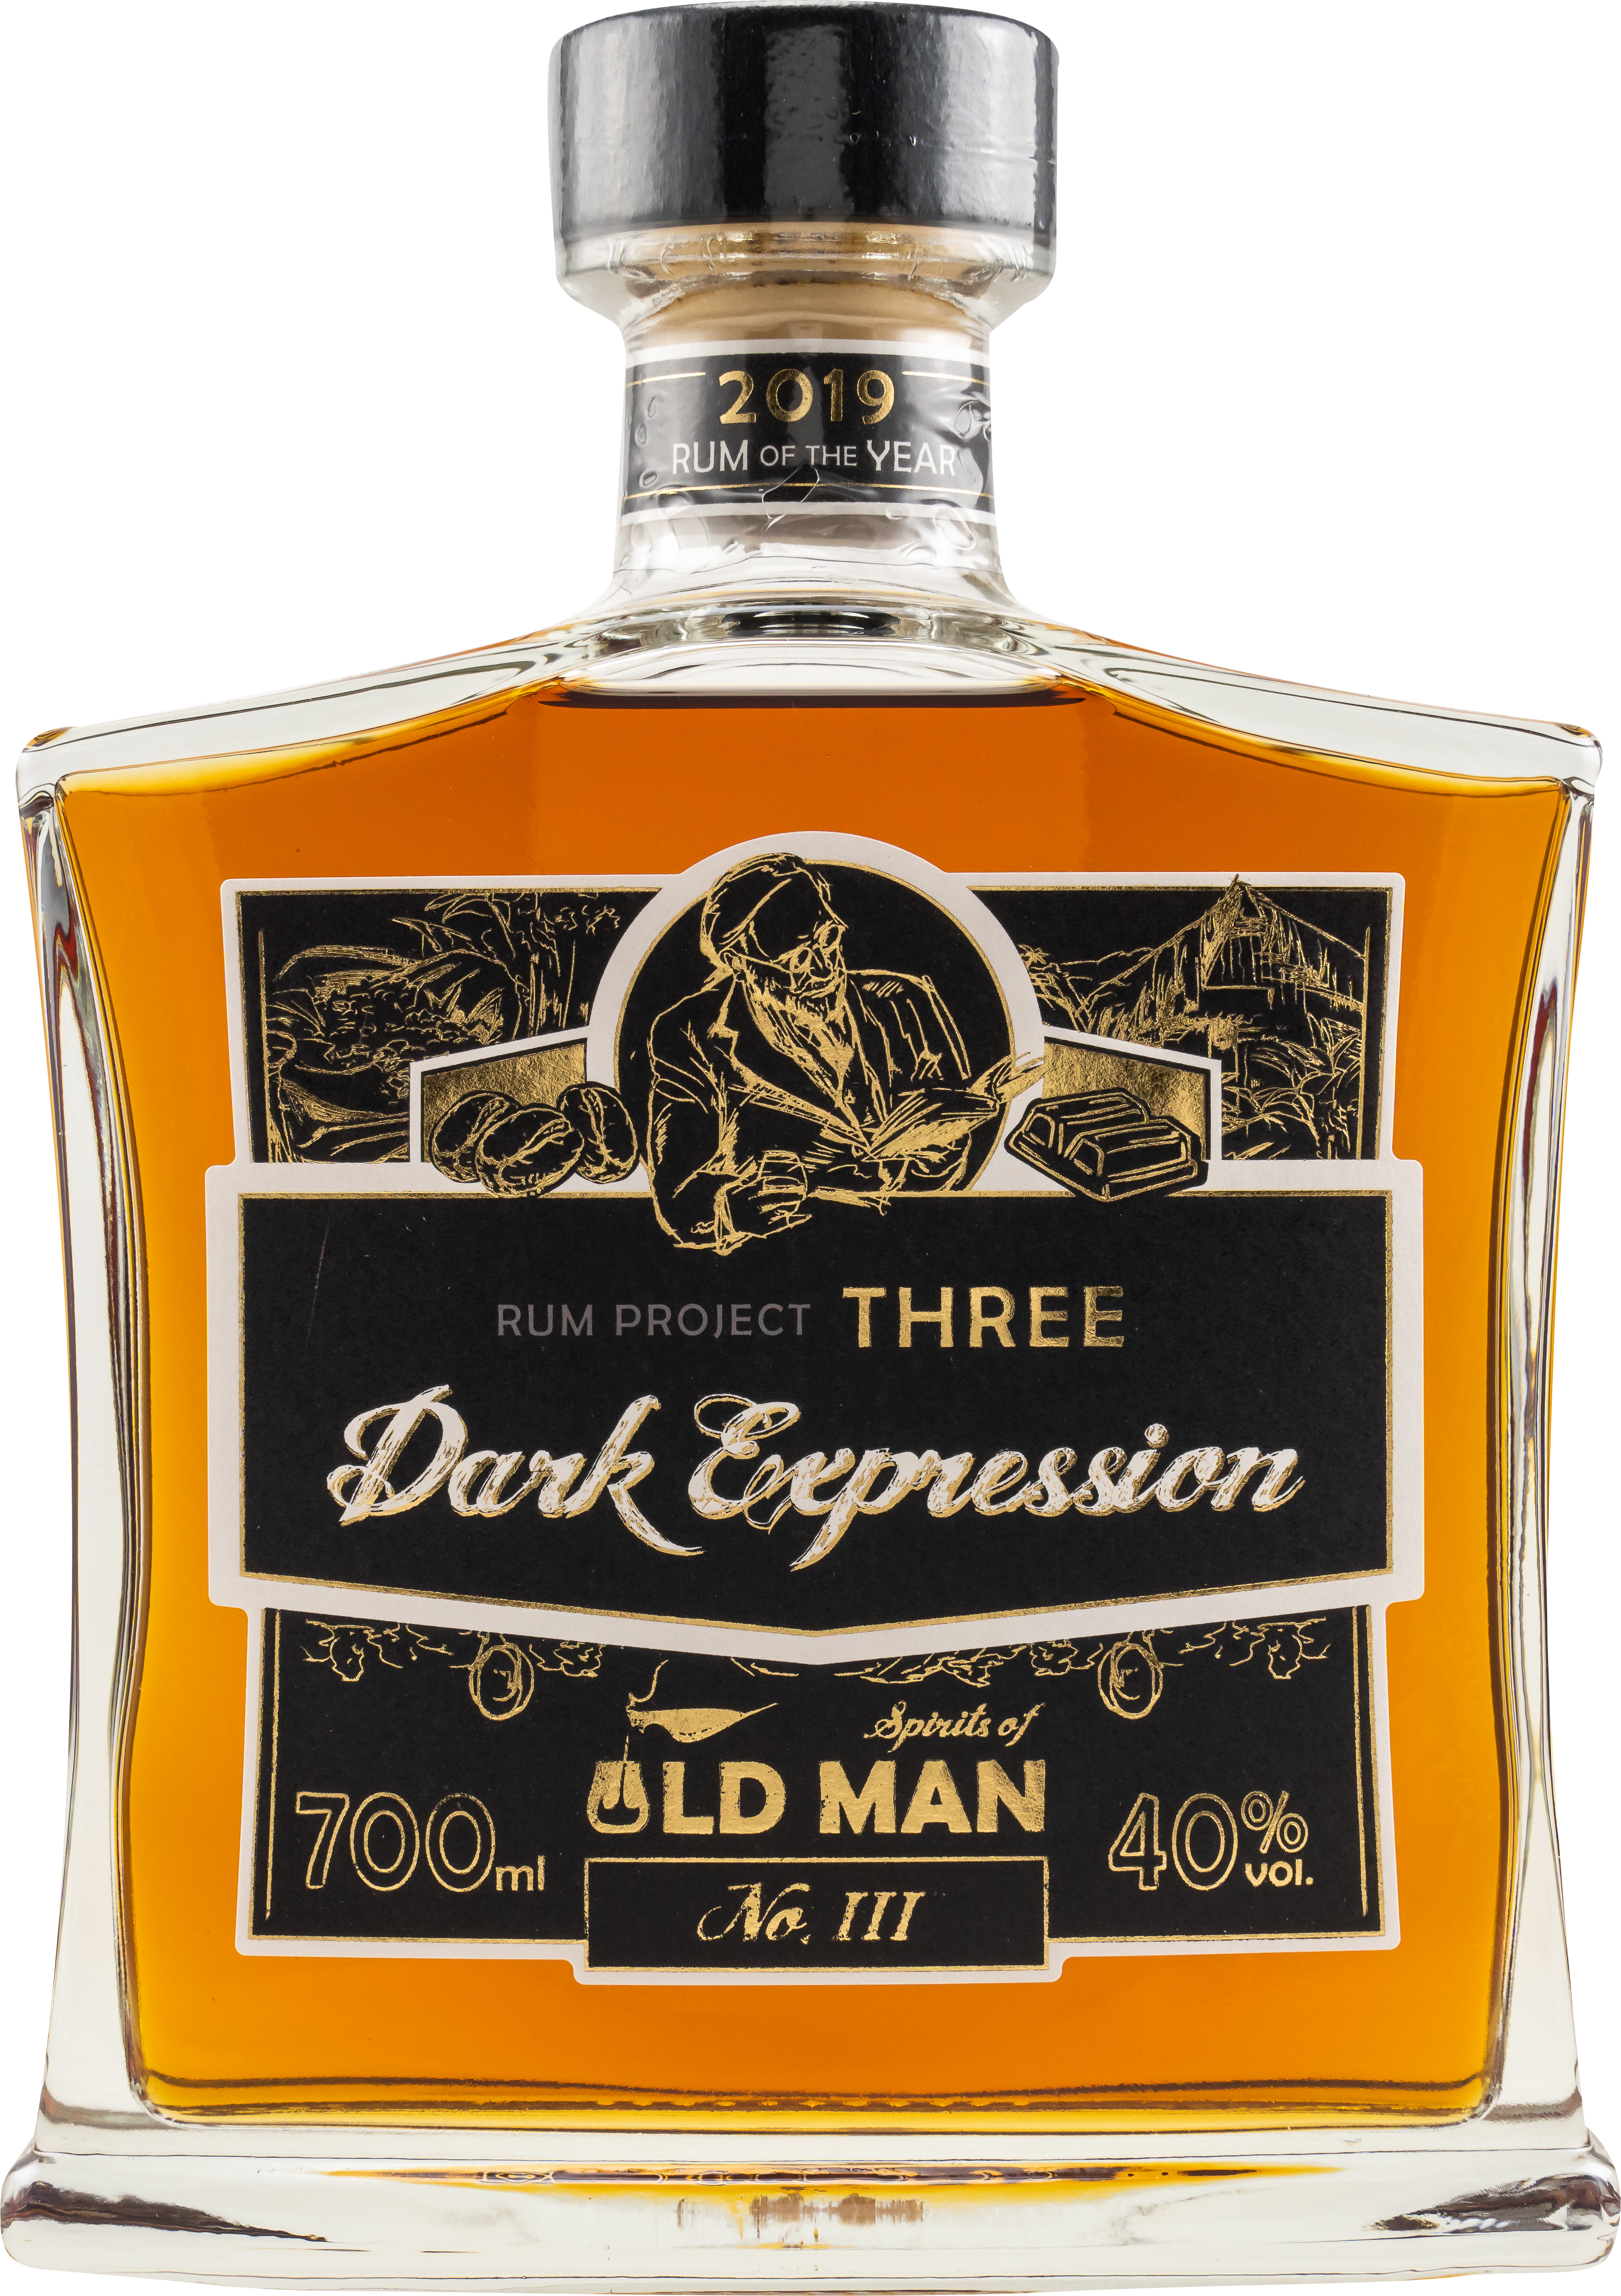 "Rum Project Three" (Dark Expression) by Spirits of Old Man 40% 0,7l